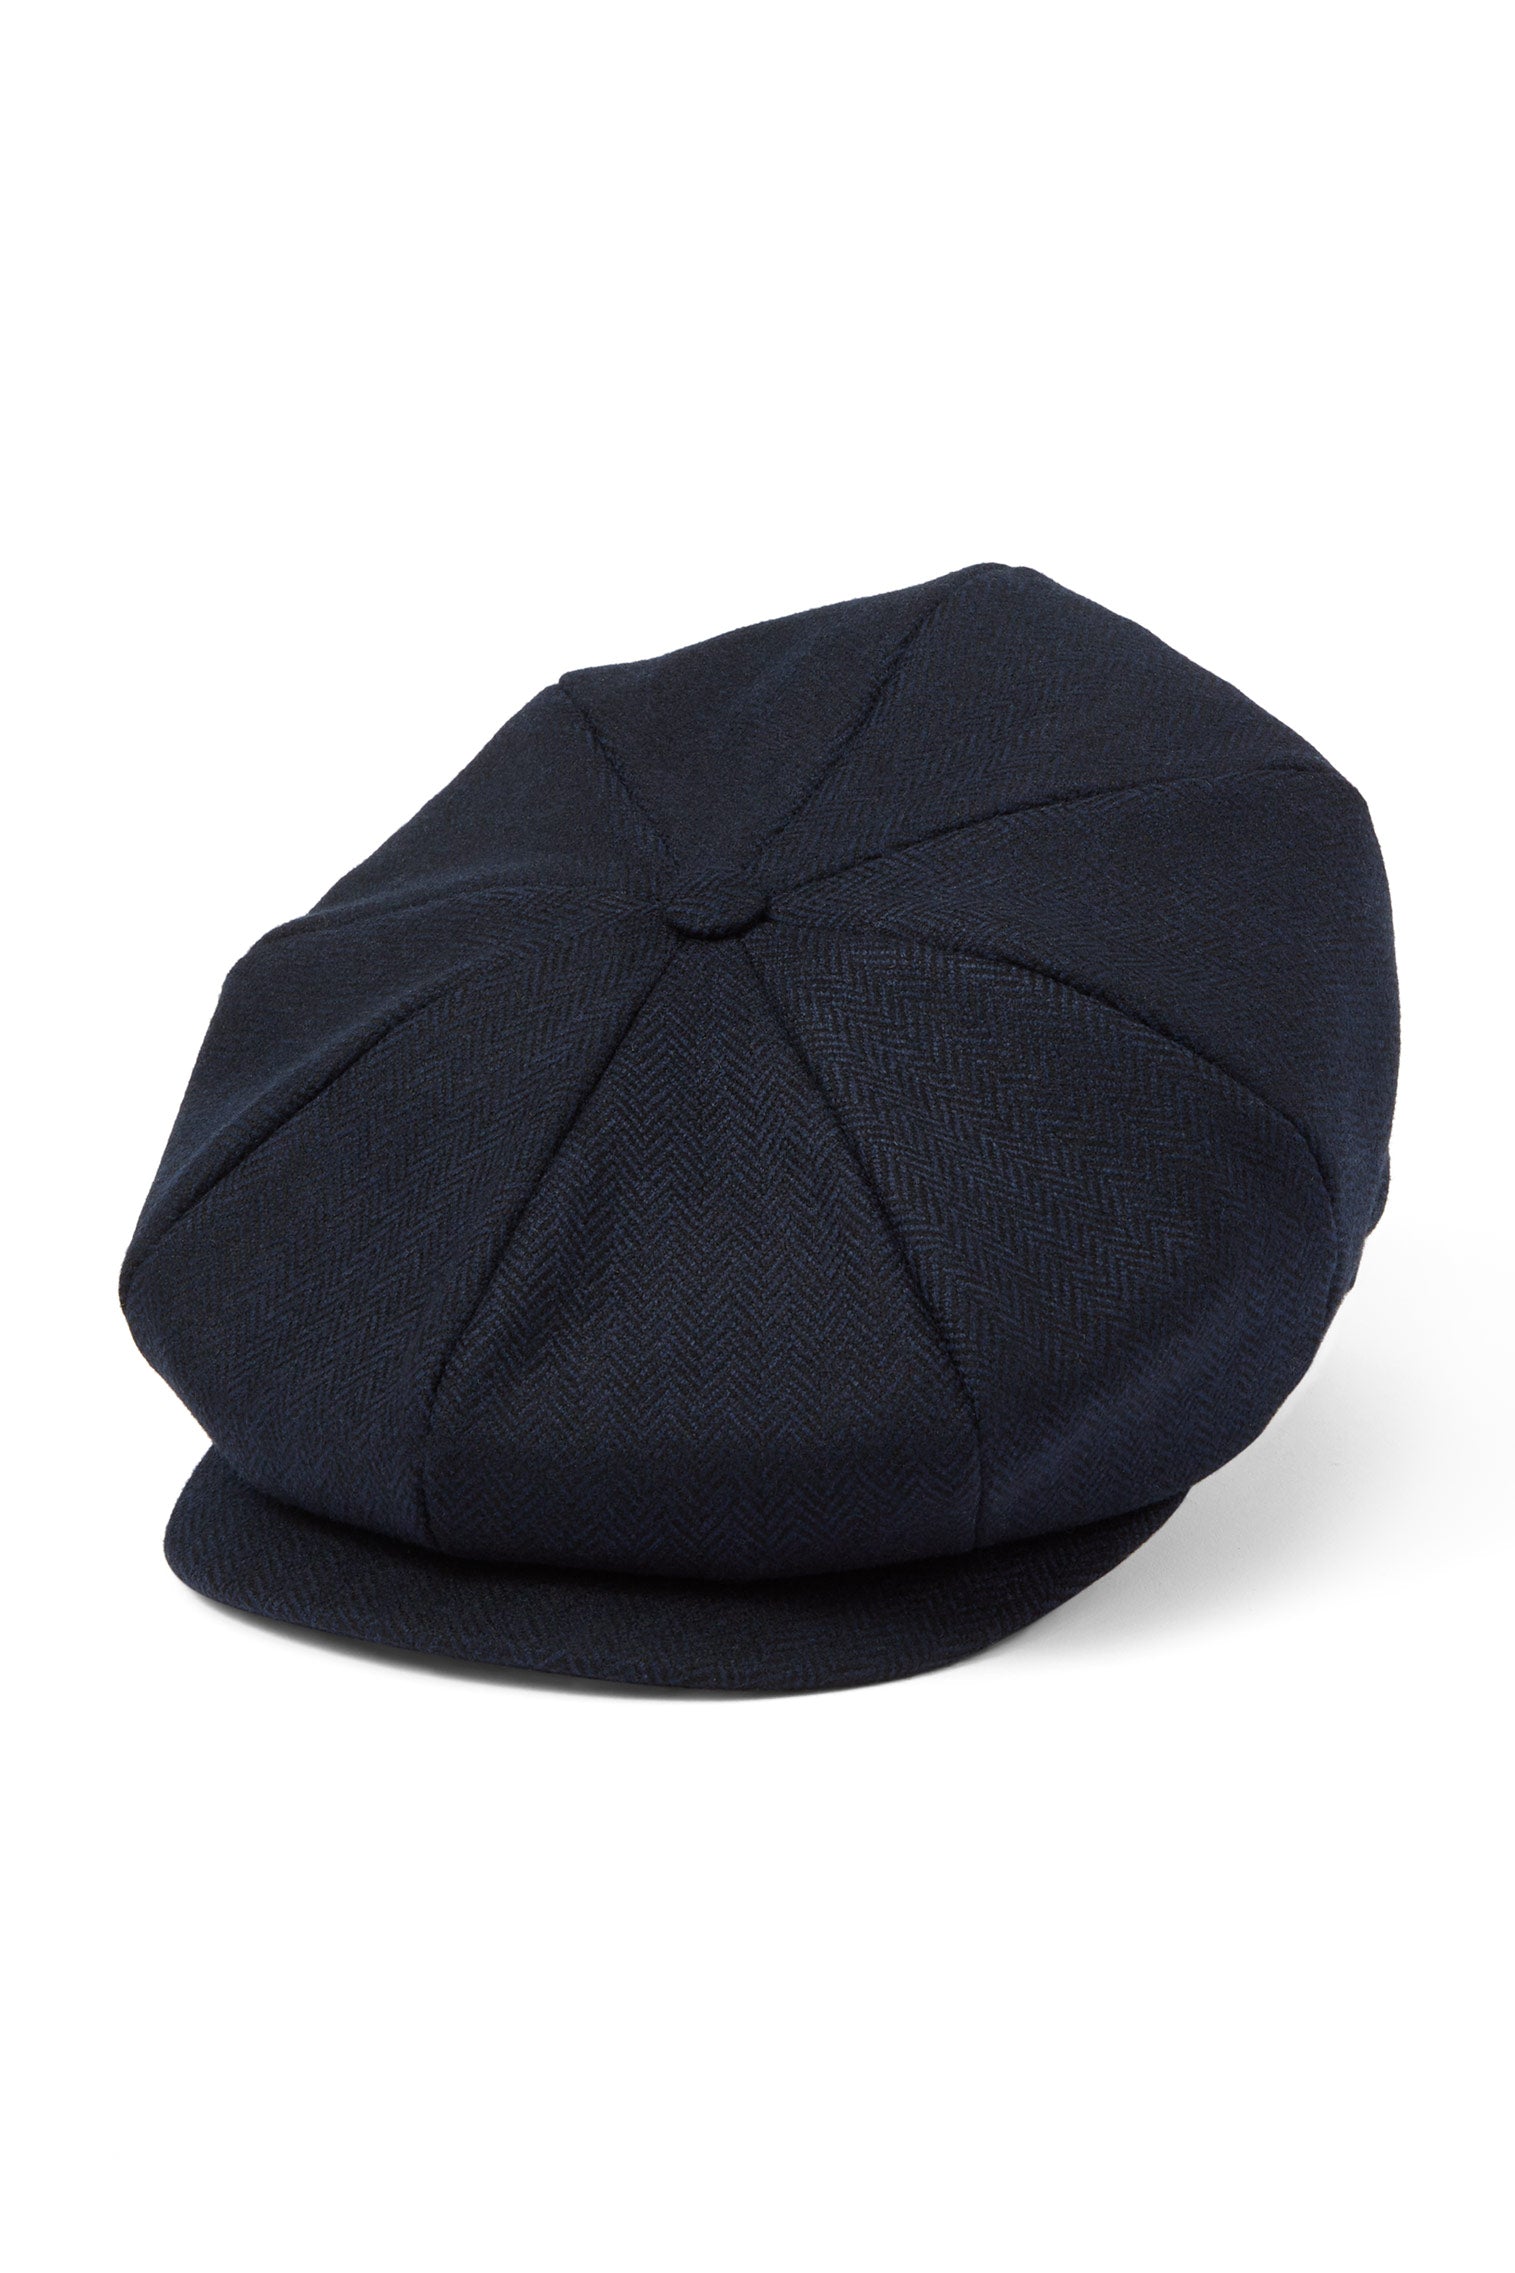 The Sixty - Cheltenham Collection - Lock & Co. Hatters London UK